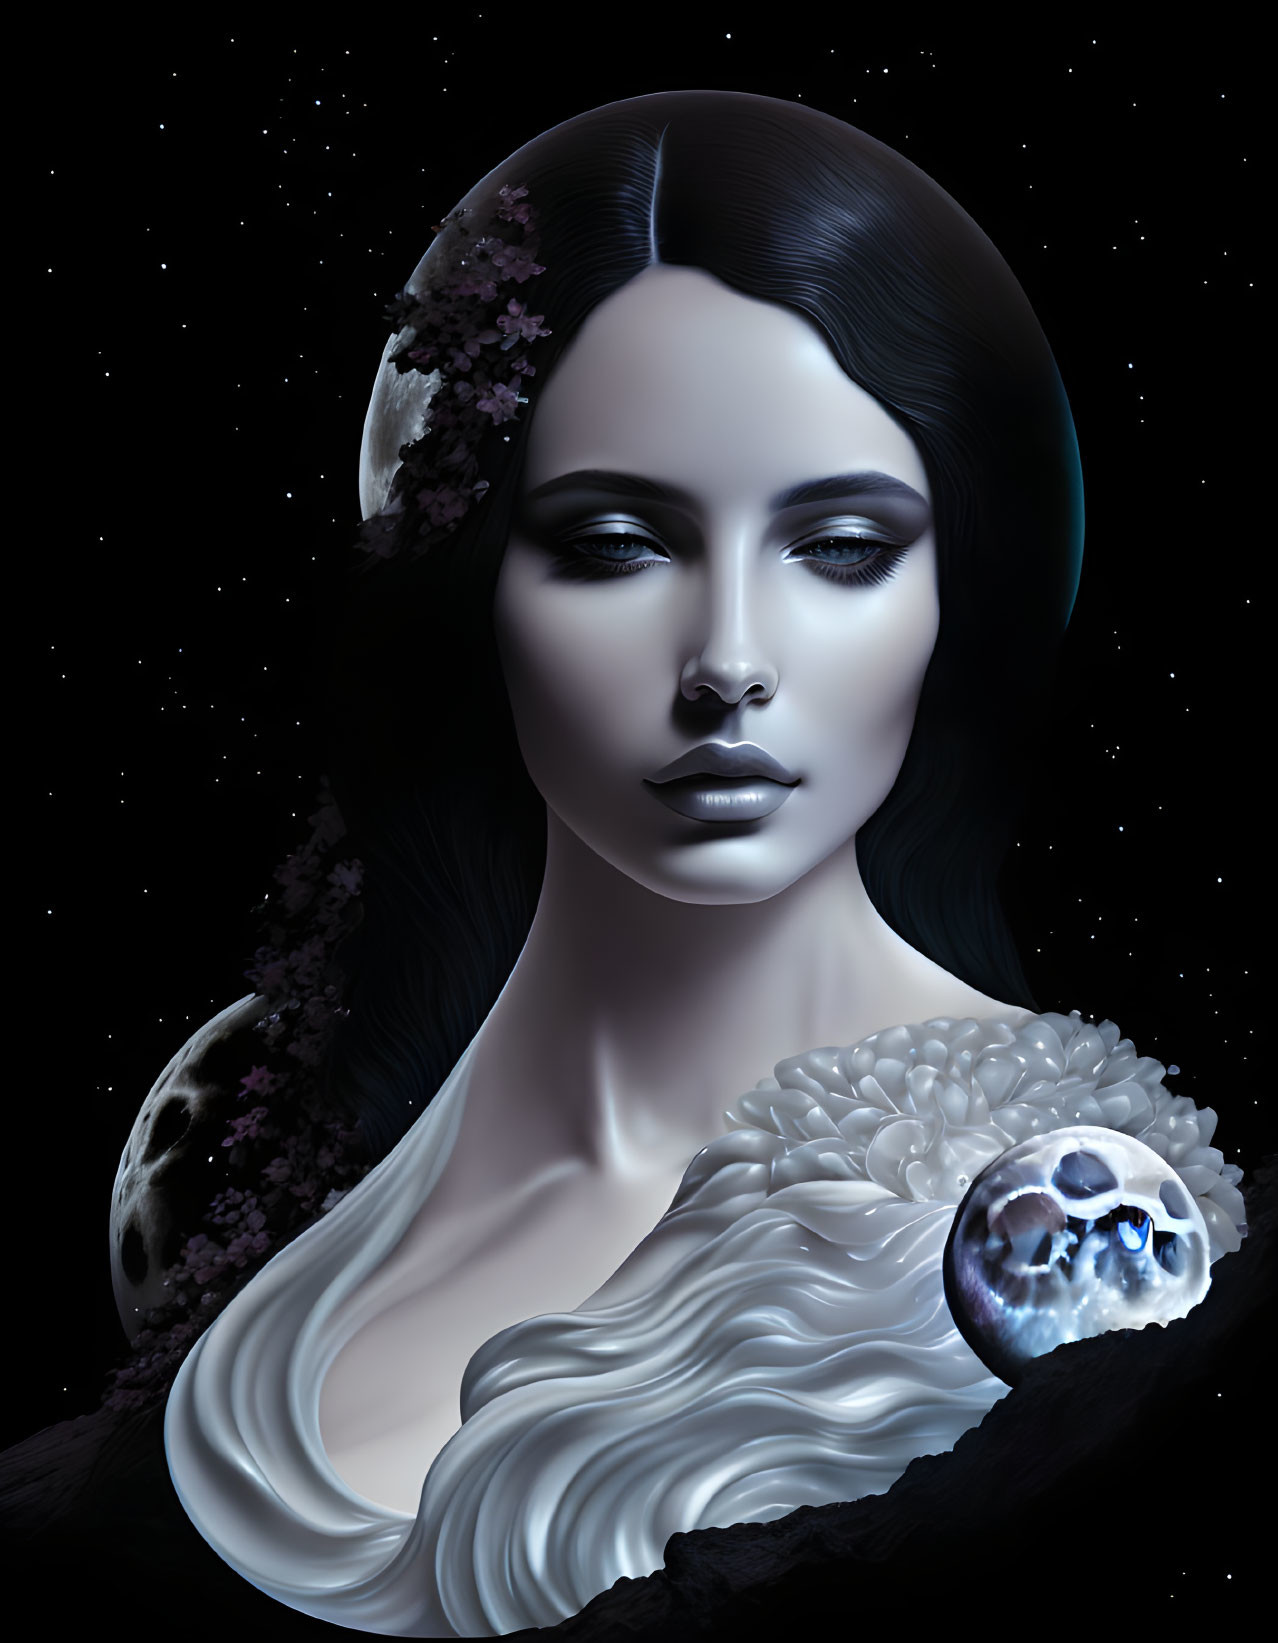 OUR LADY OF THE MANY FORMS - SELENE 02272023